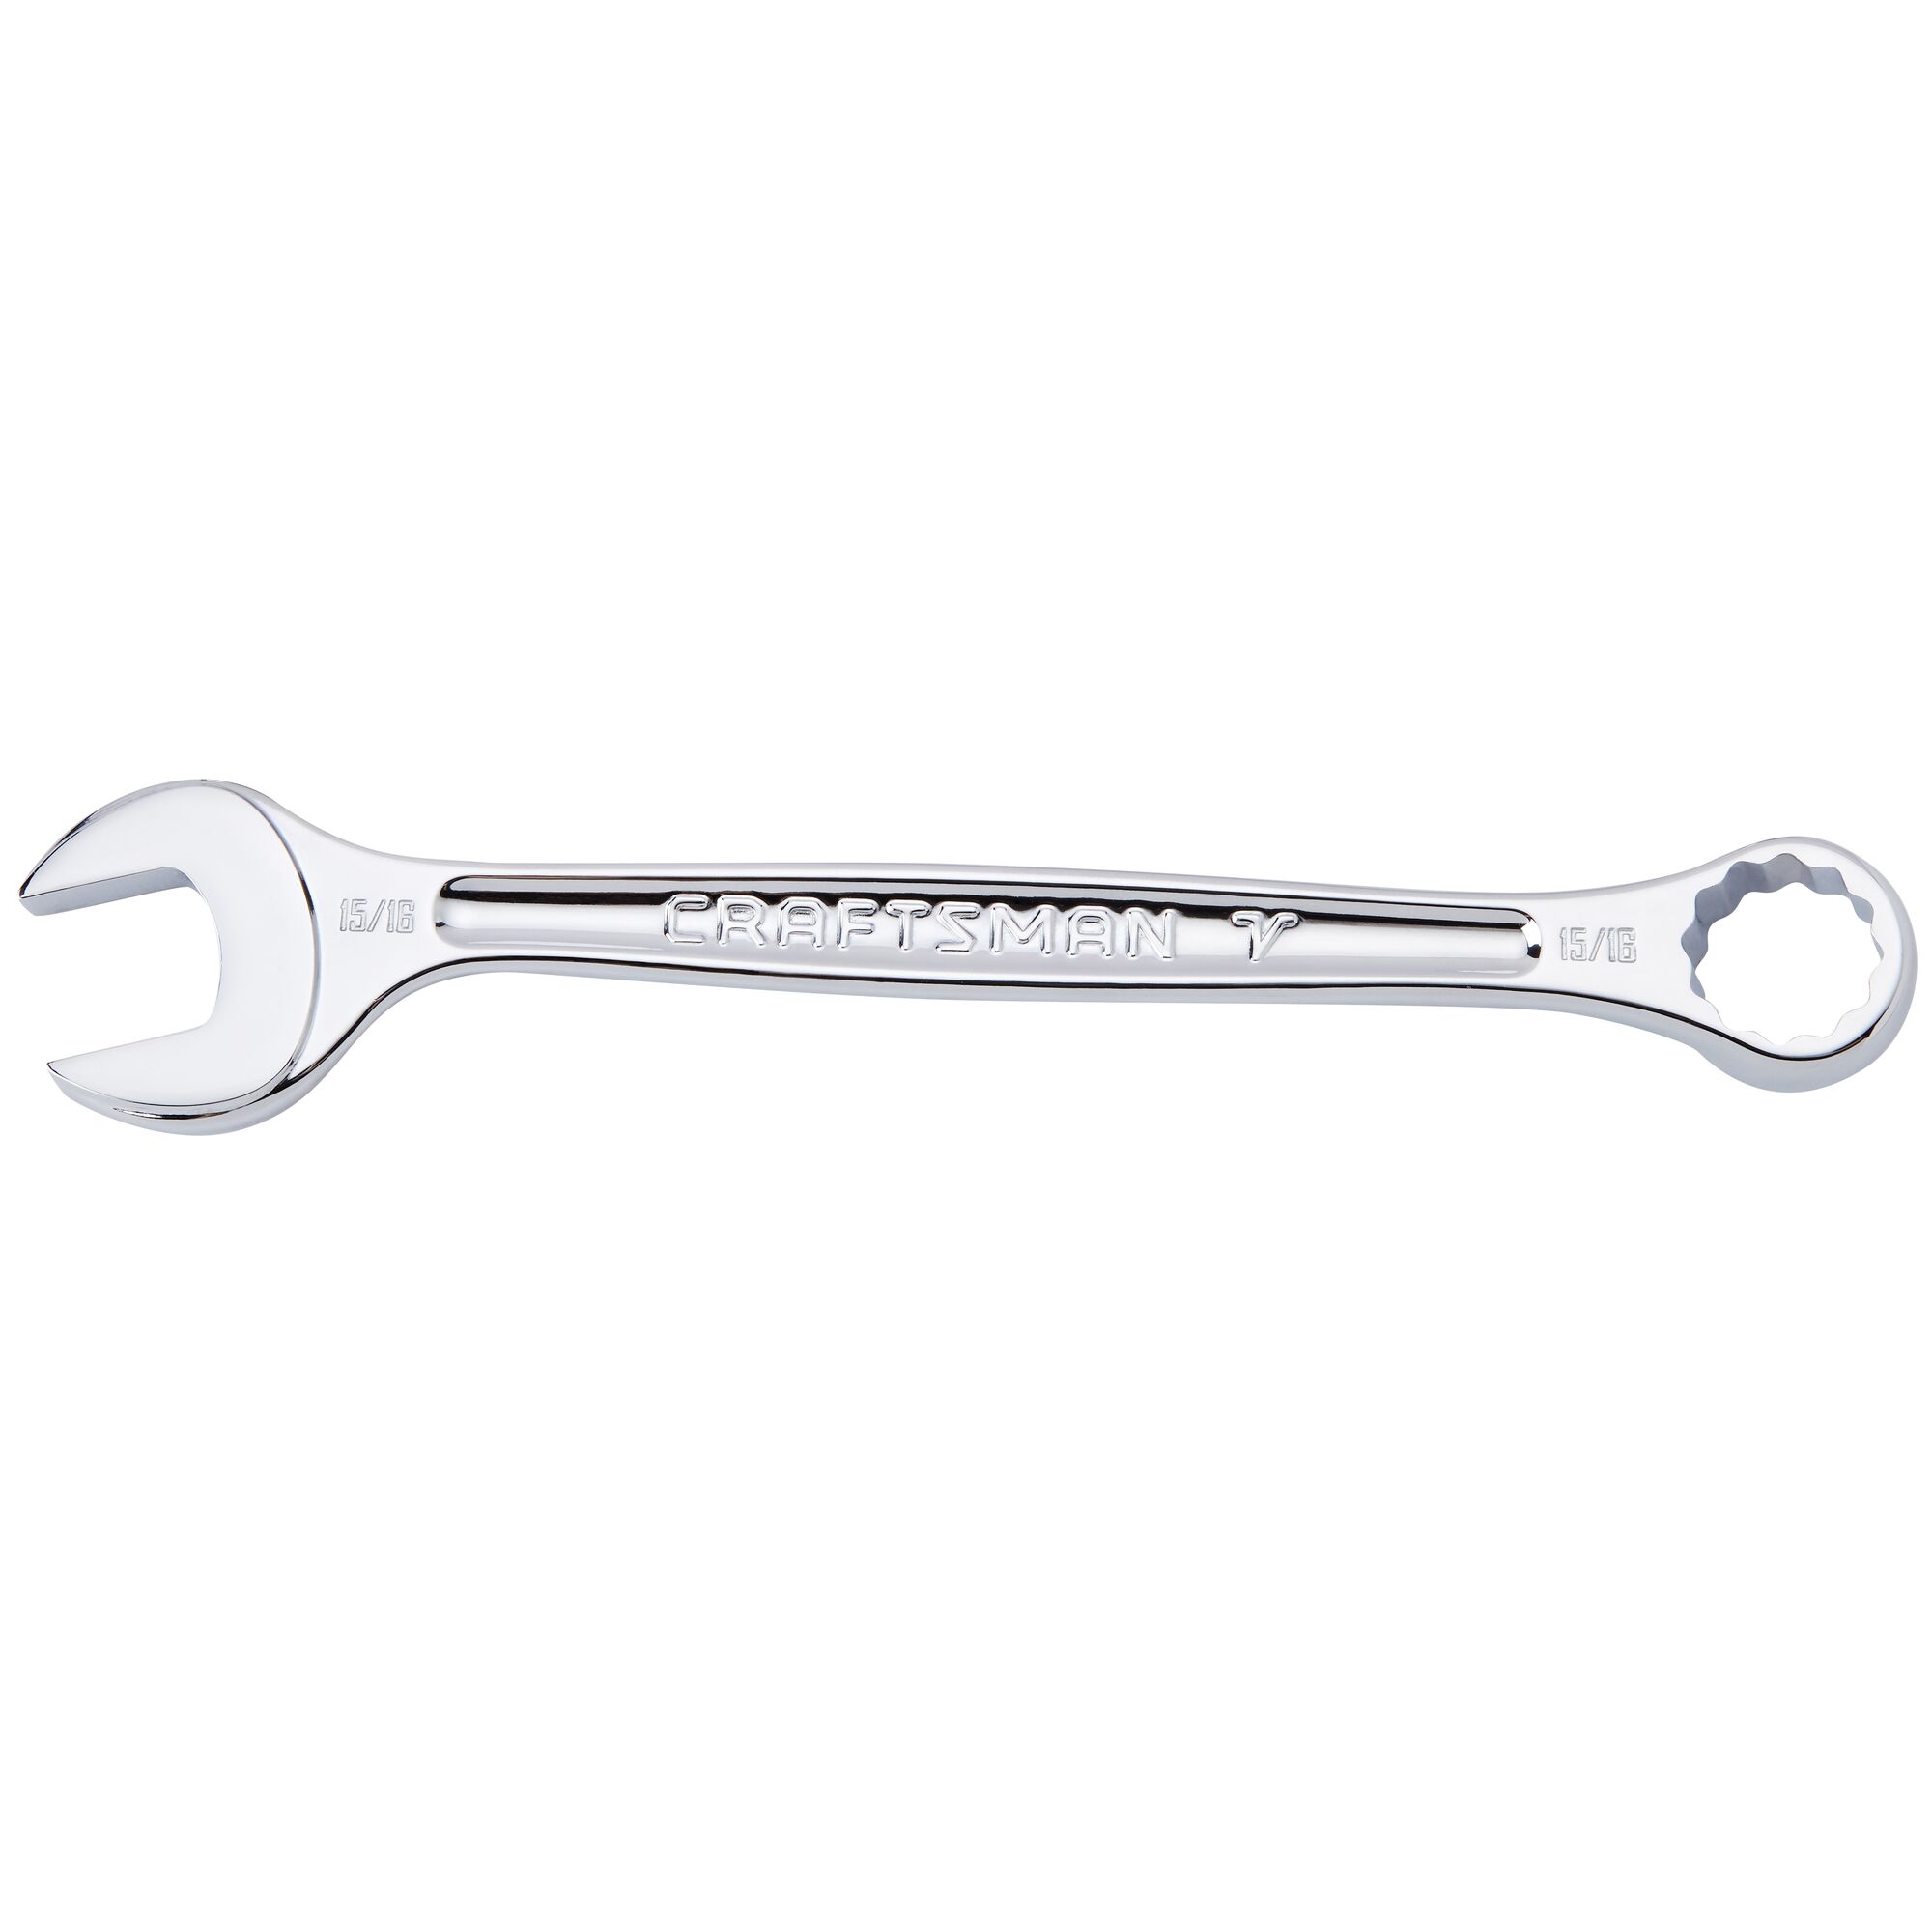 CRAFTSMAN V-SERIES Combo Wrench 15/16 